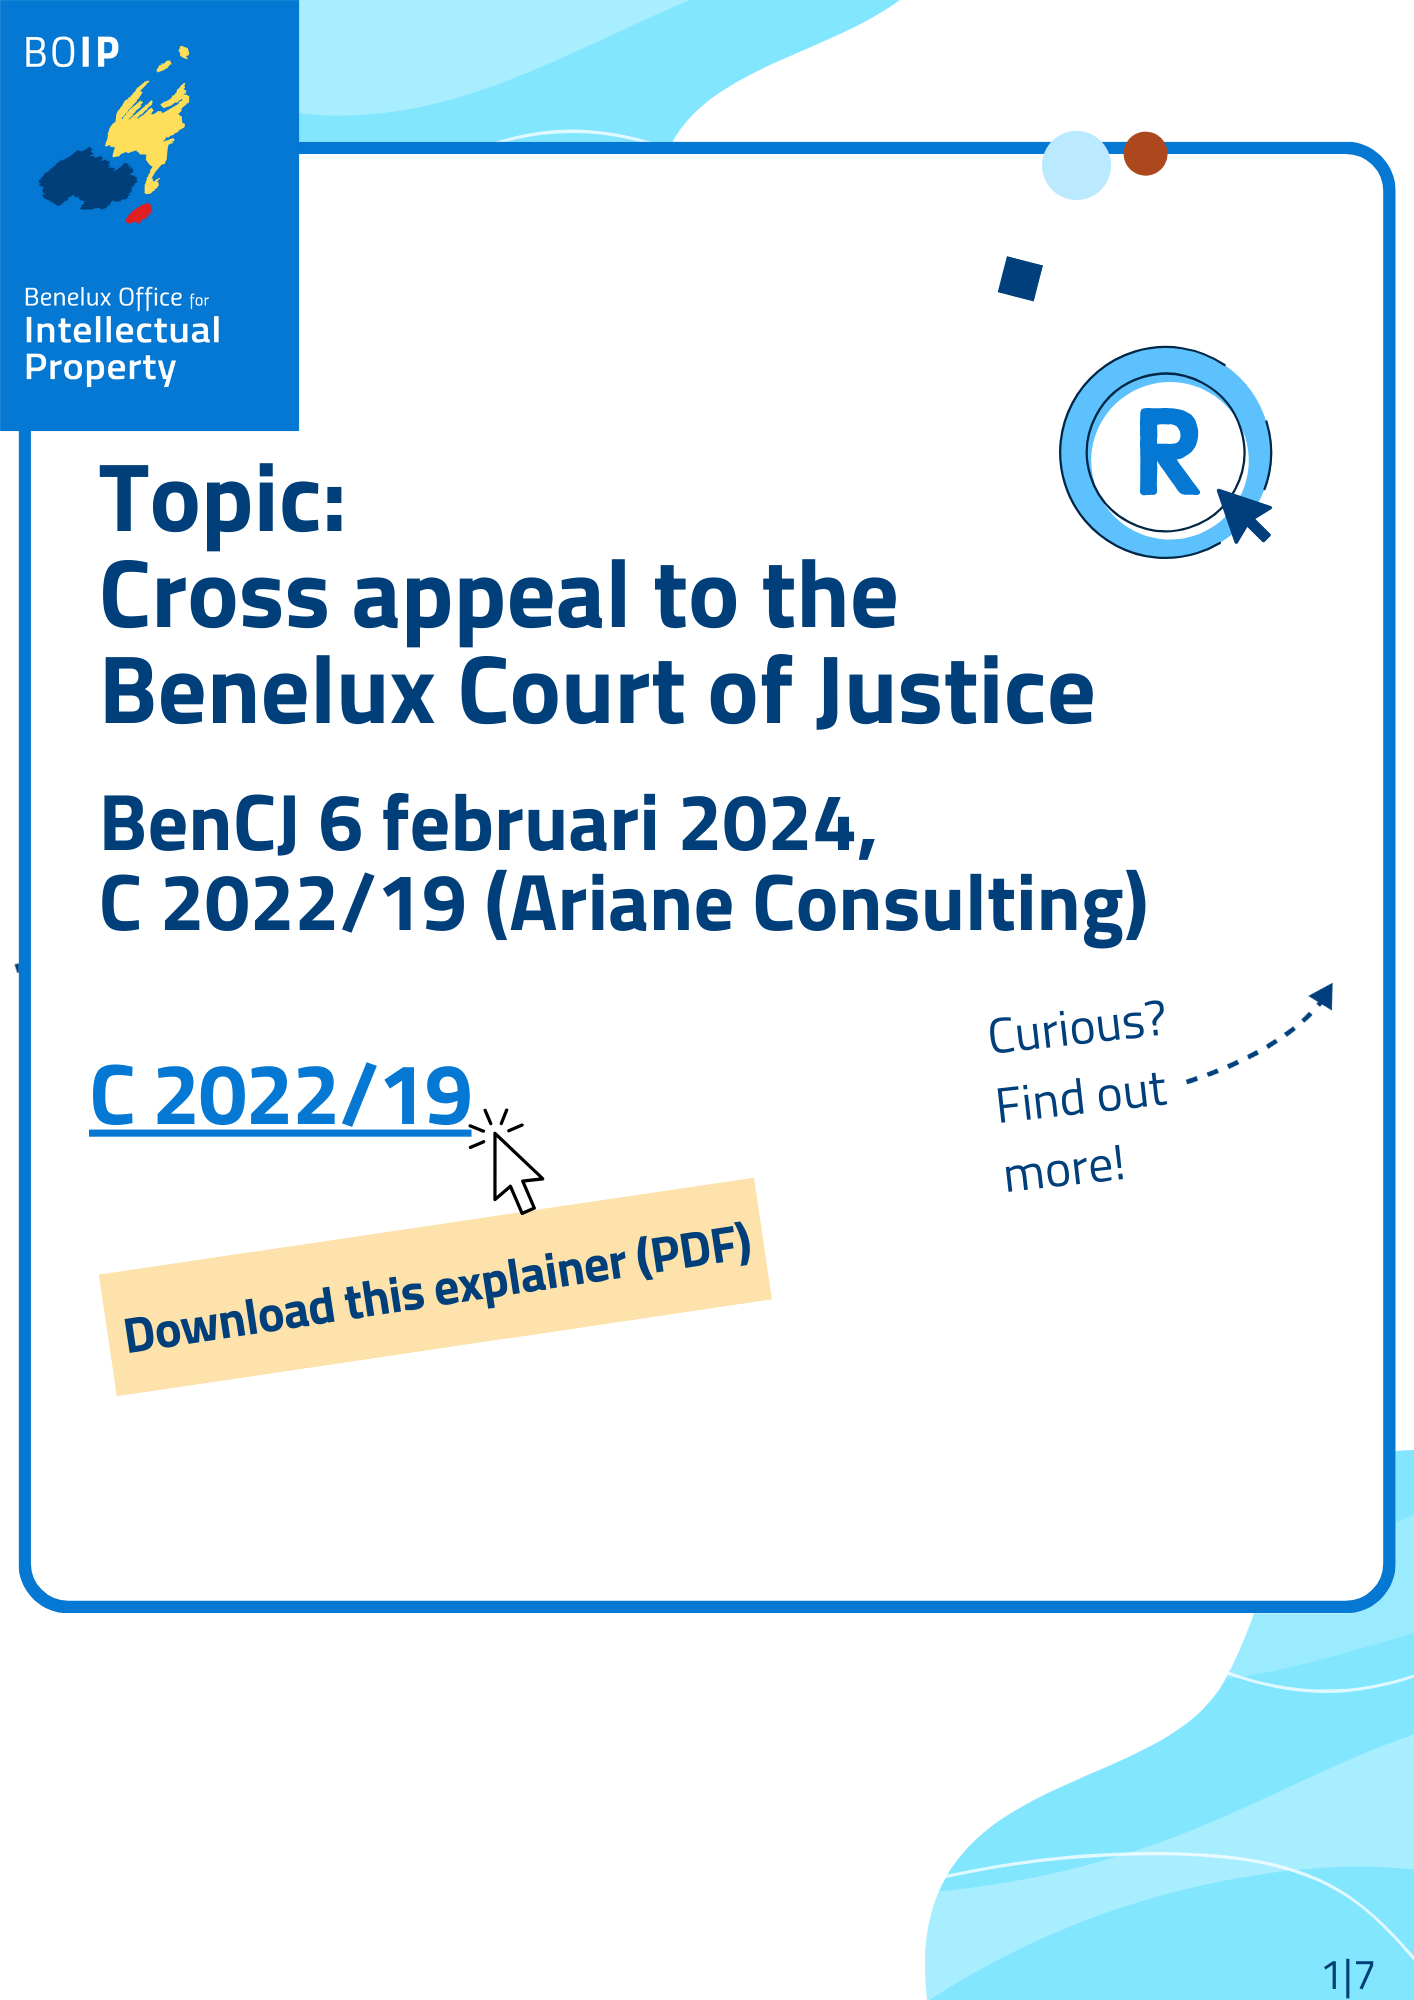 Cross appeal to the Benelux Court of Justice: BenCJ 6 februari 2024, C 2022/19 (Ariane Consulting) 